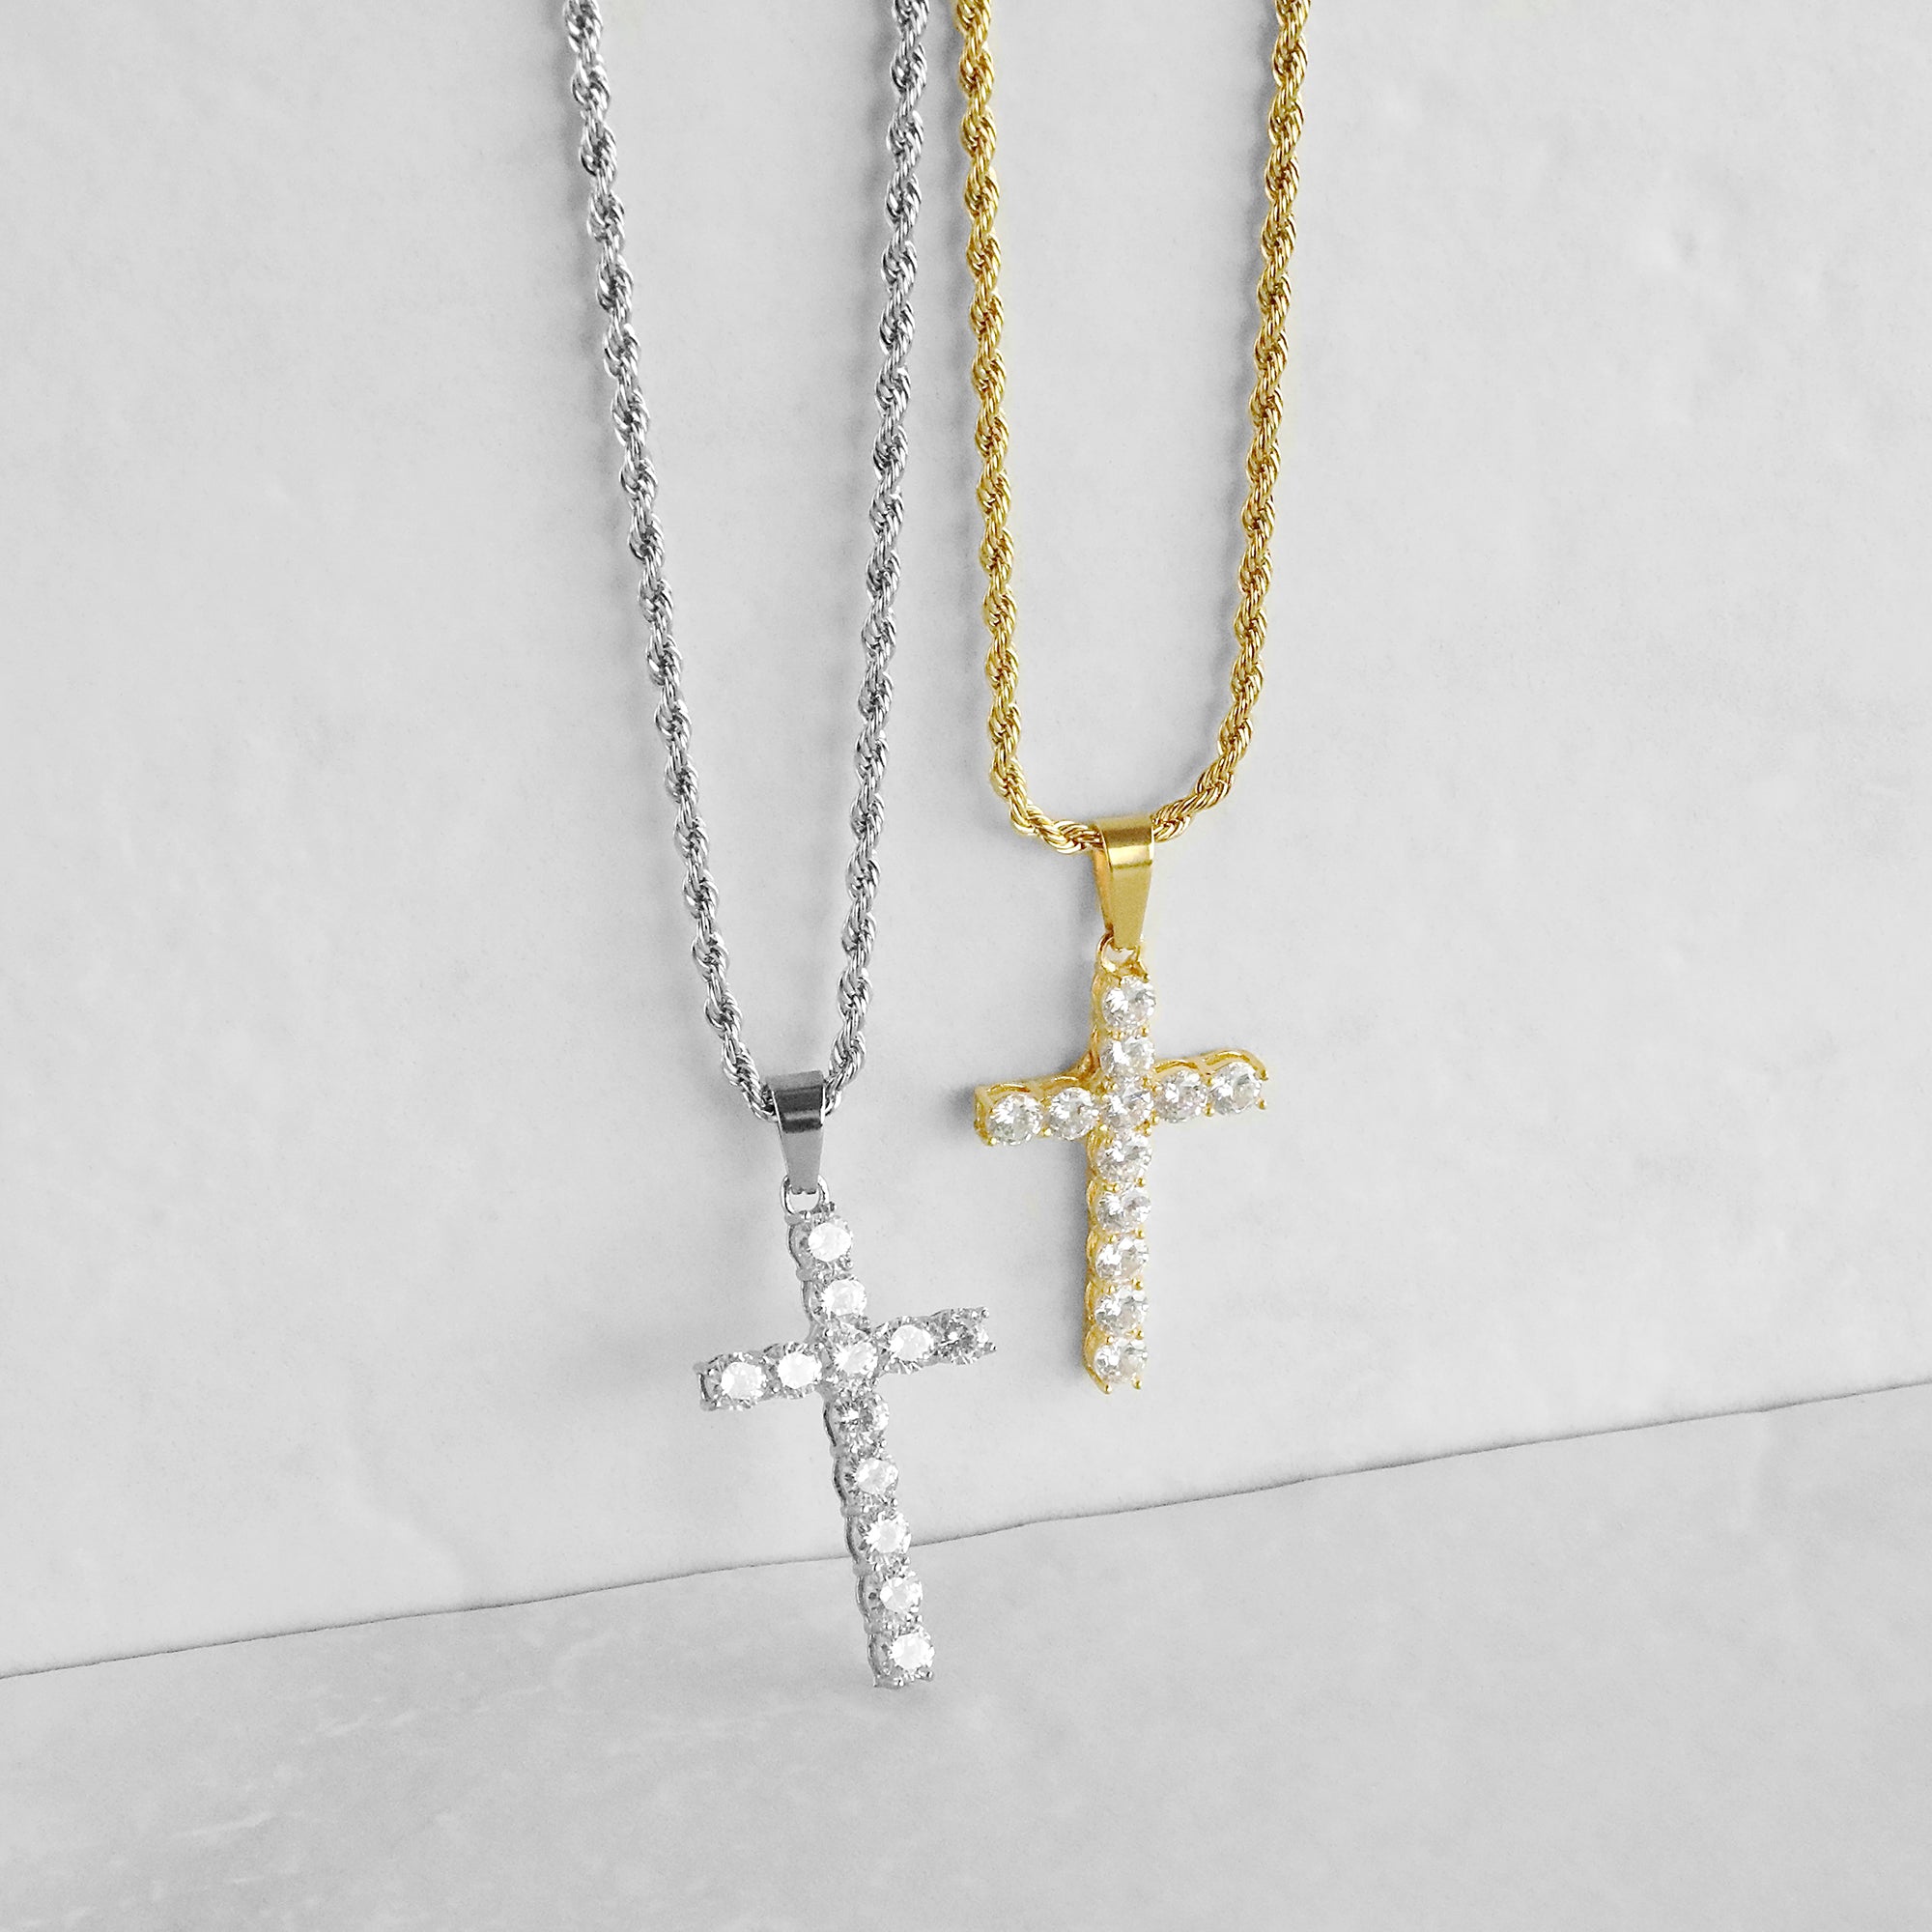 Ice Cross Necklace - Silver